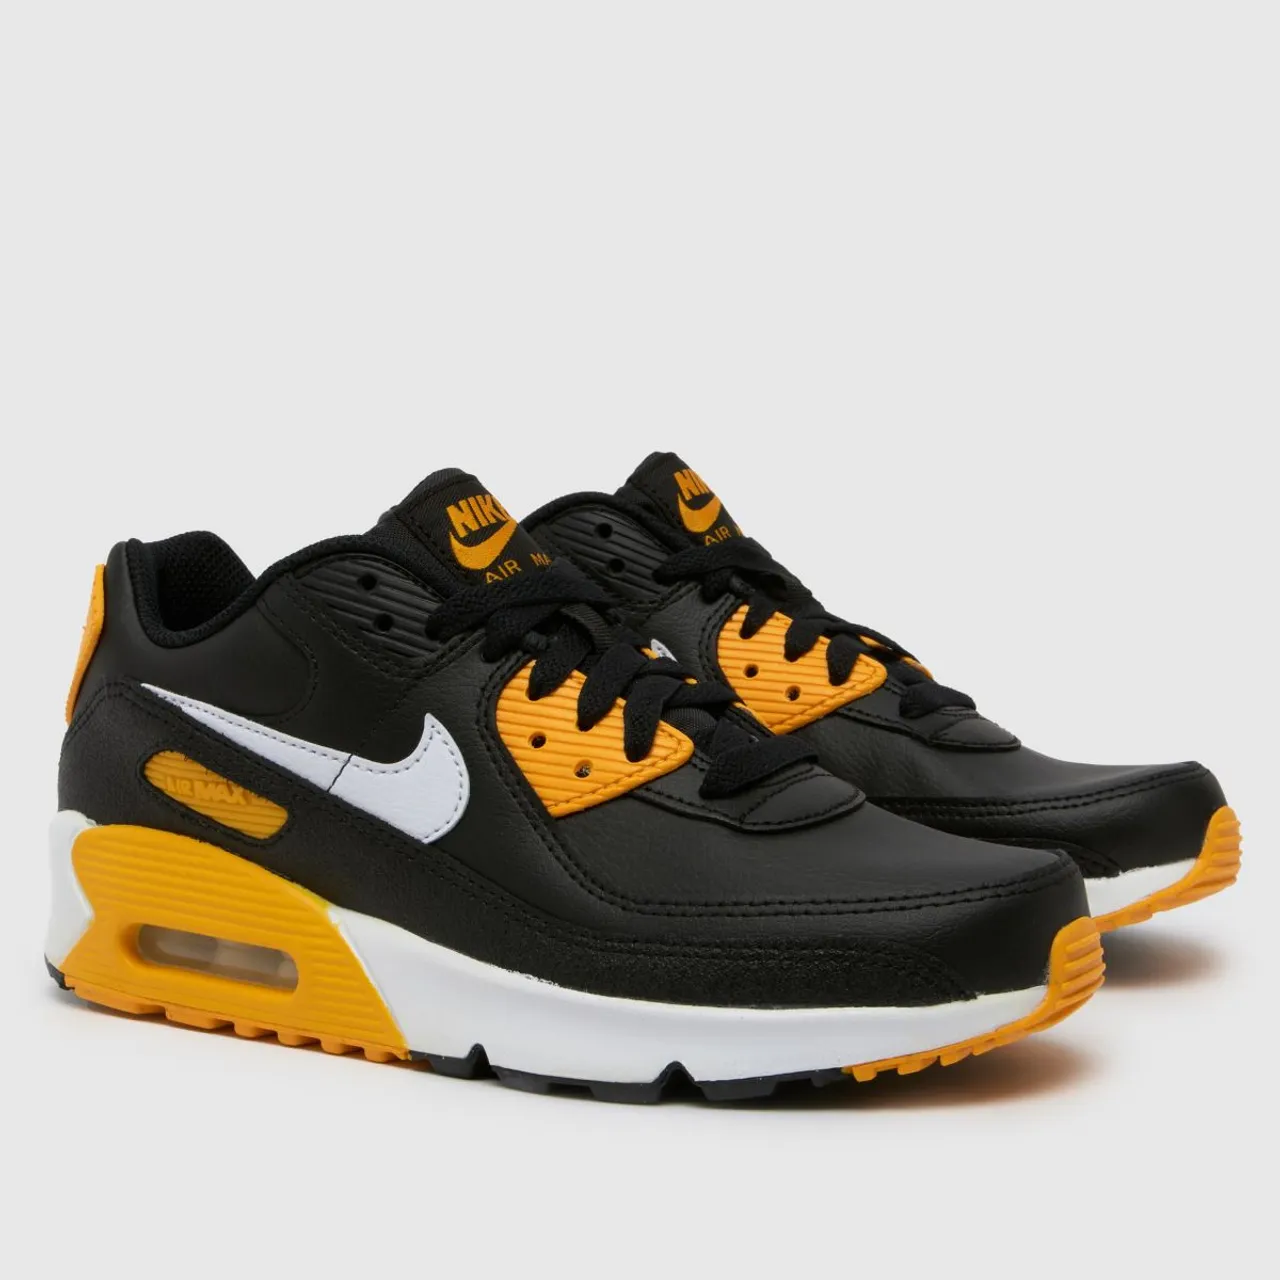 Nike Black Multi air max 90 ltr Youth Trainers